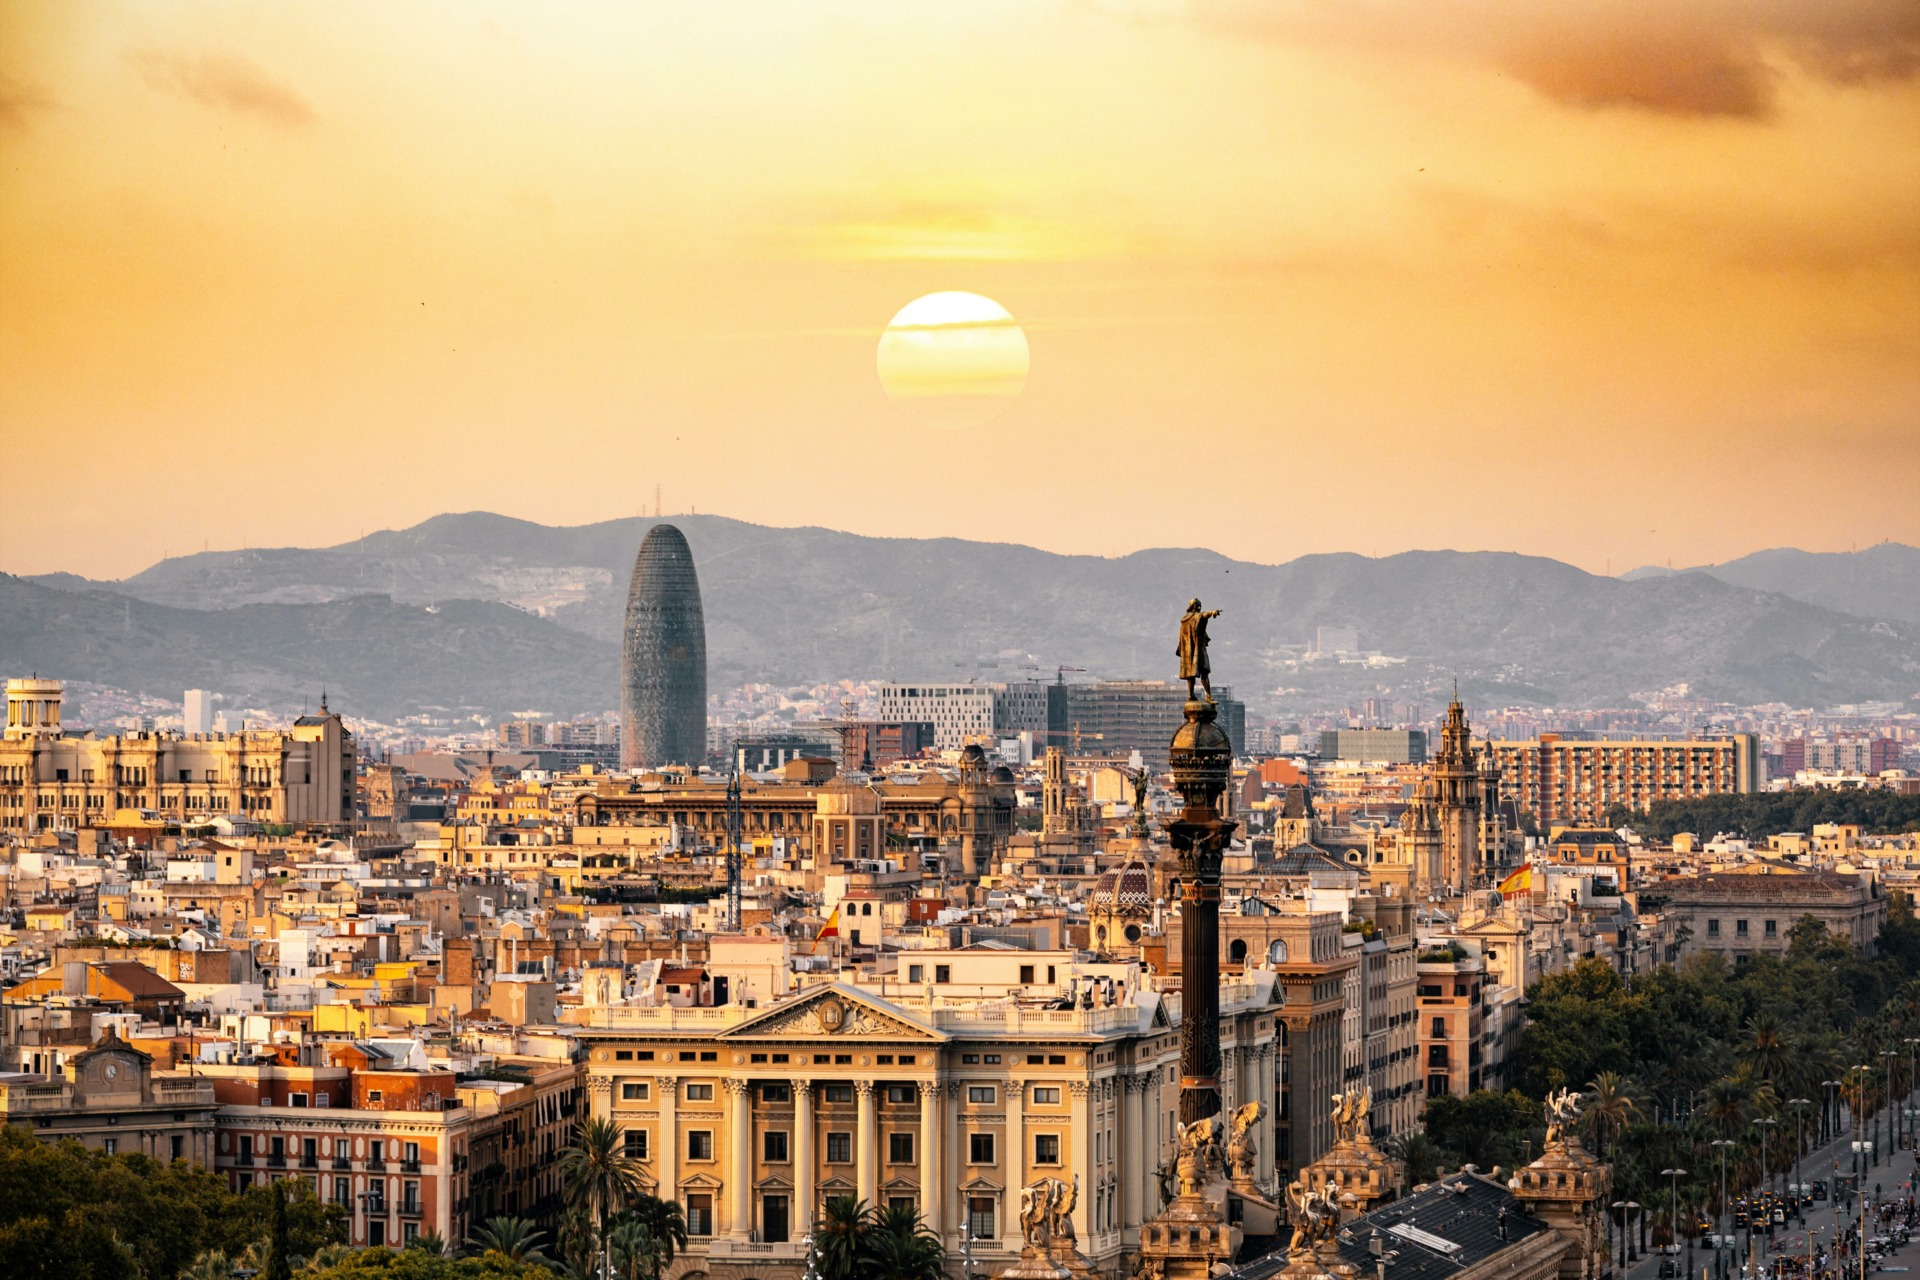 A cityscape of Barcelona at sunset, showcasing historical and modern architecture, with the Columbus Monument in the foreground and the distinctive, cylindrical Torre Glòries building in the background against a backdrop of mountains.